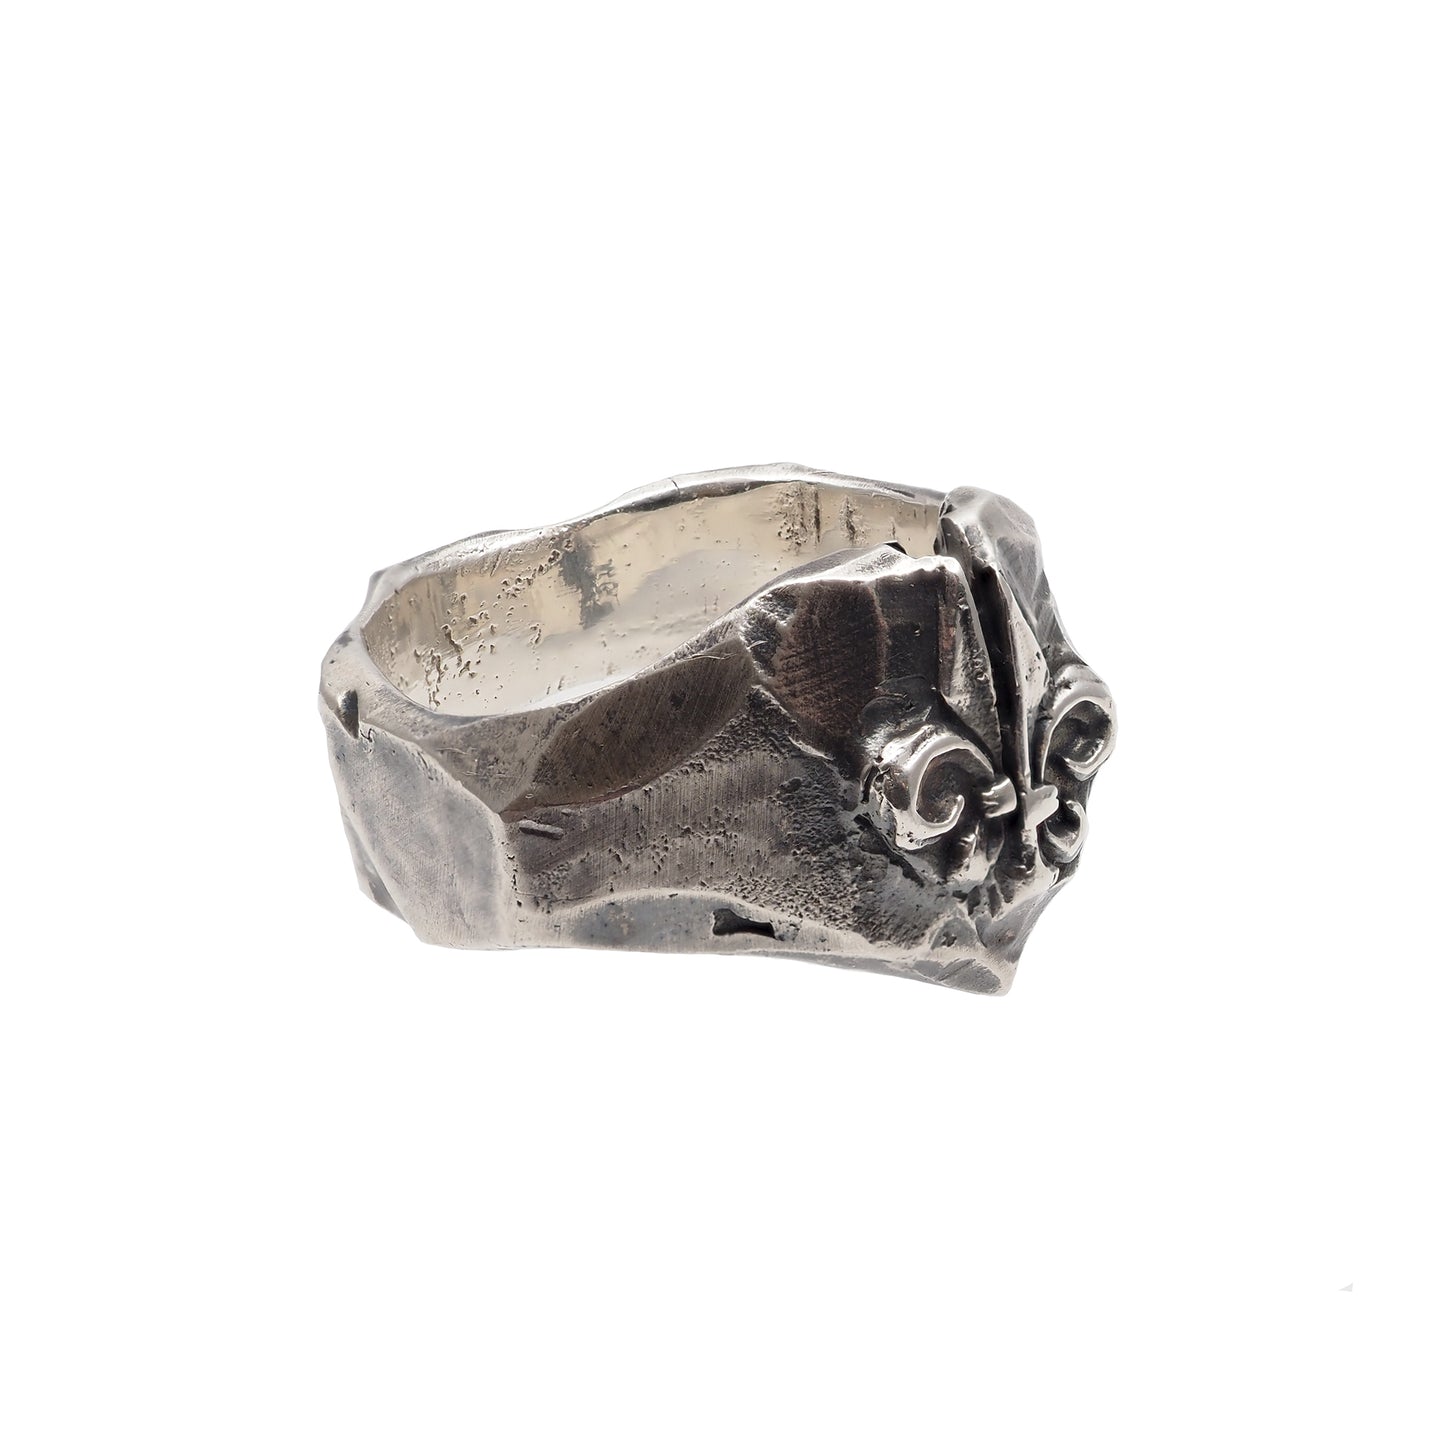 King Arthur's Knight Silver Signet Ring features a fleur-de-lis on a Shattered shield- A Tribute to Arthurian Legends